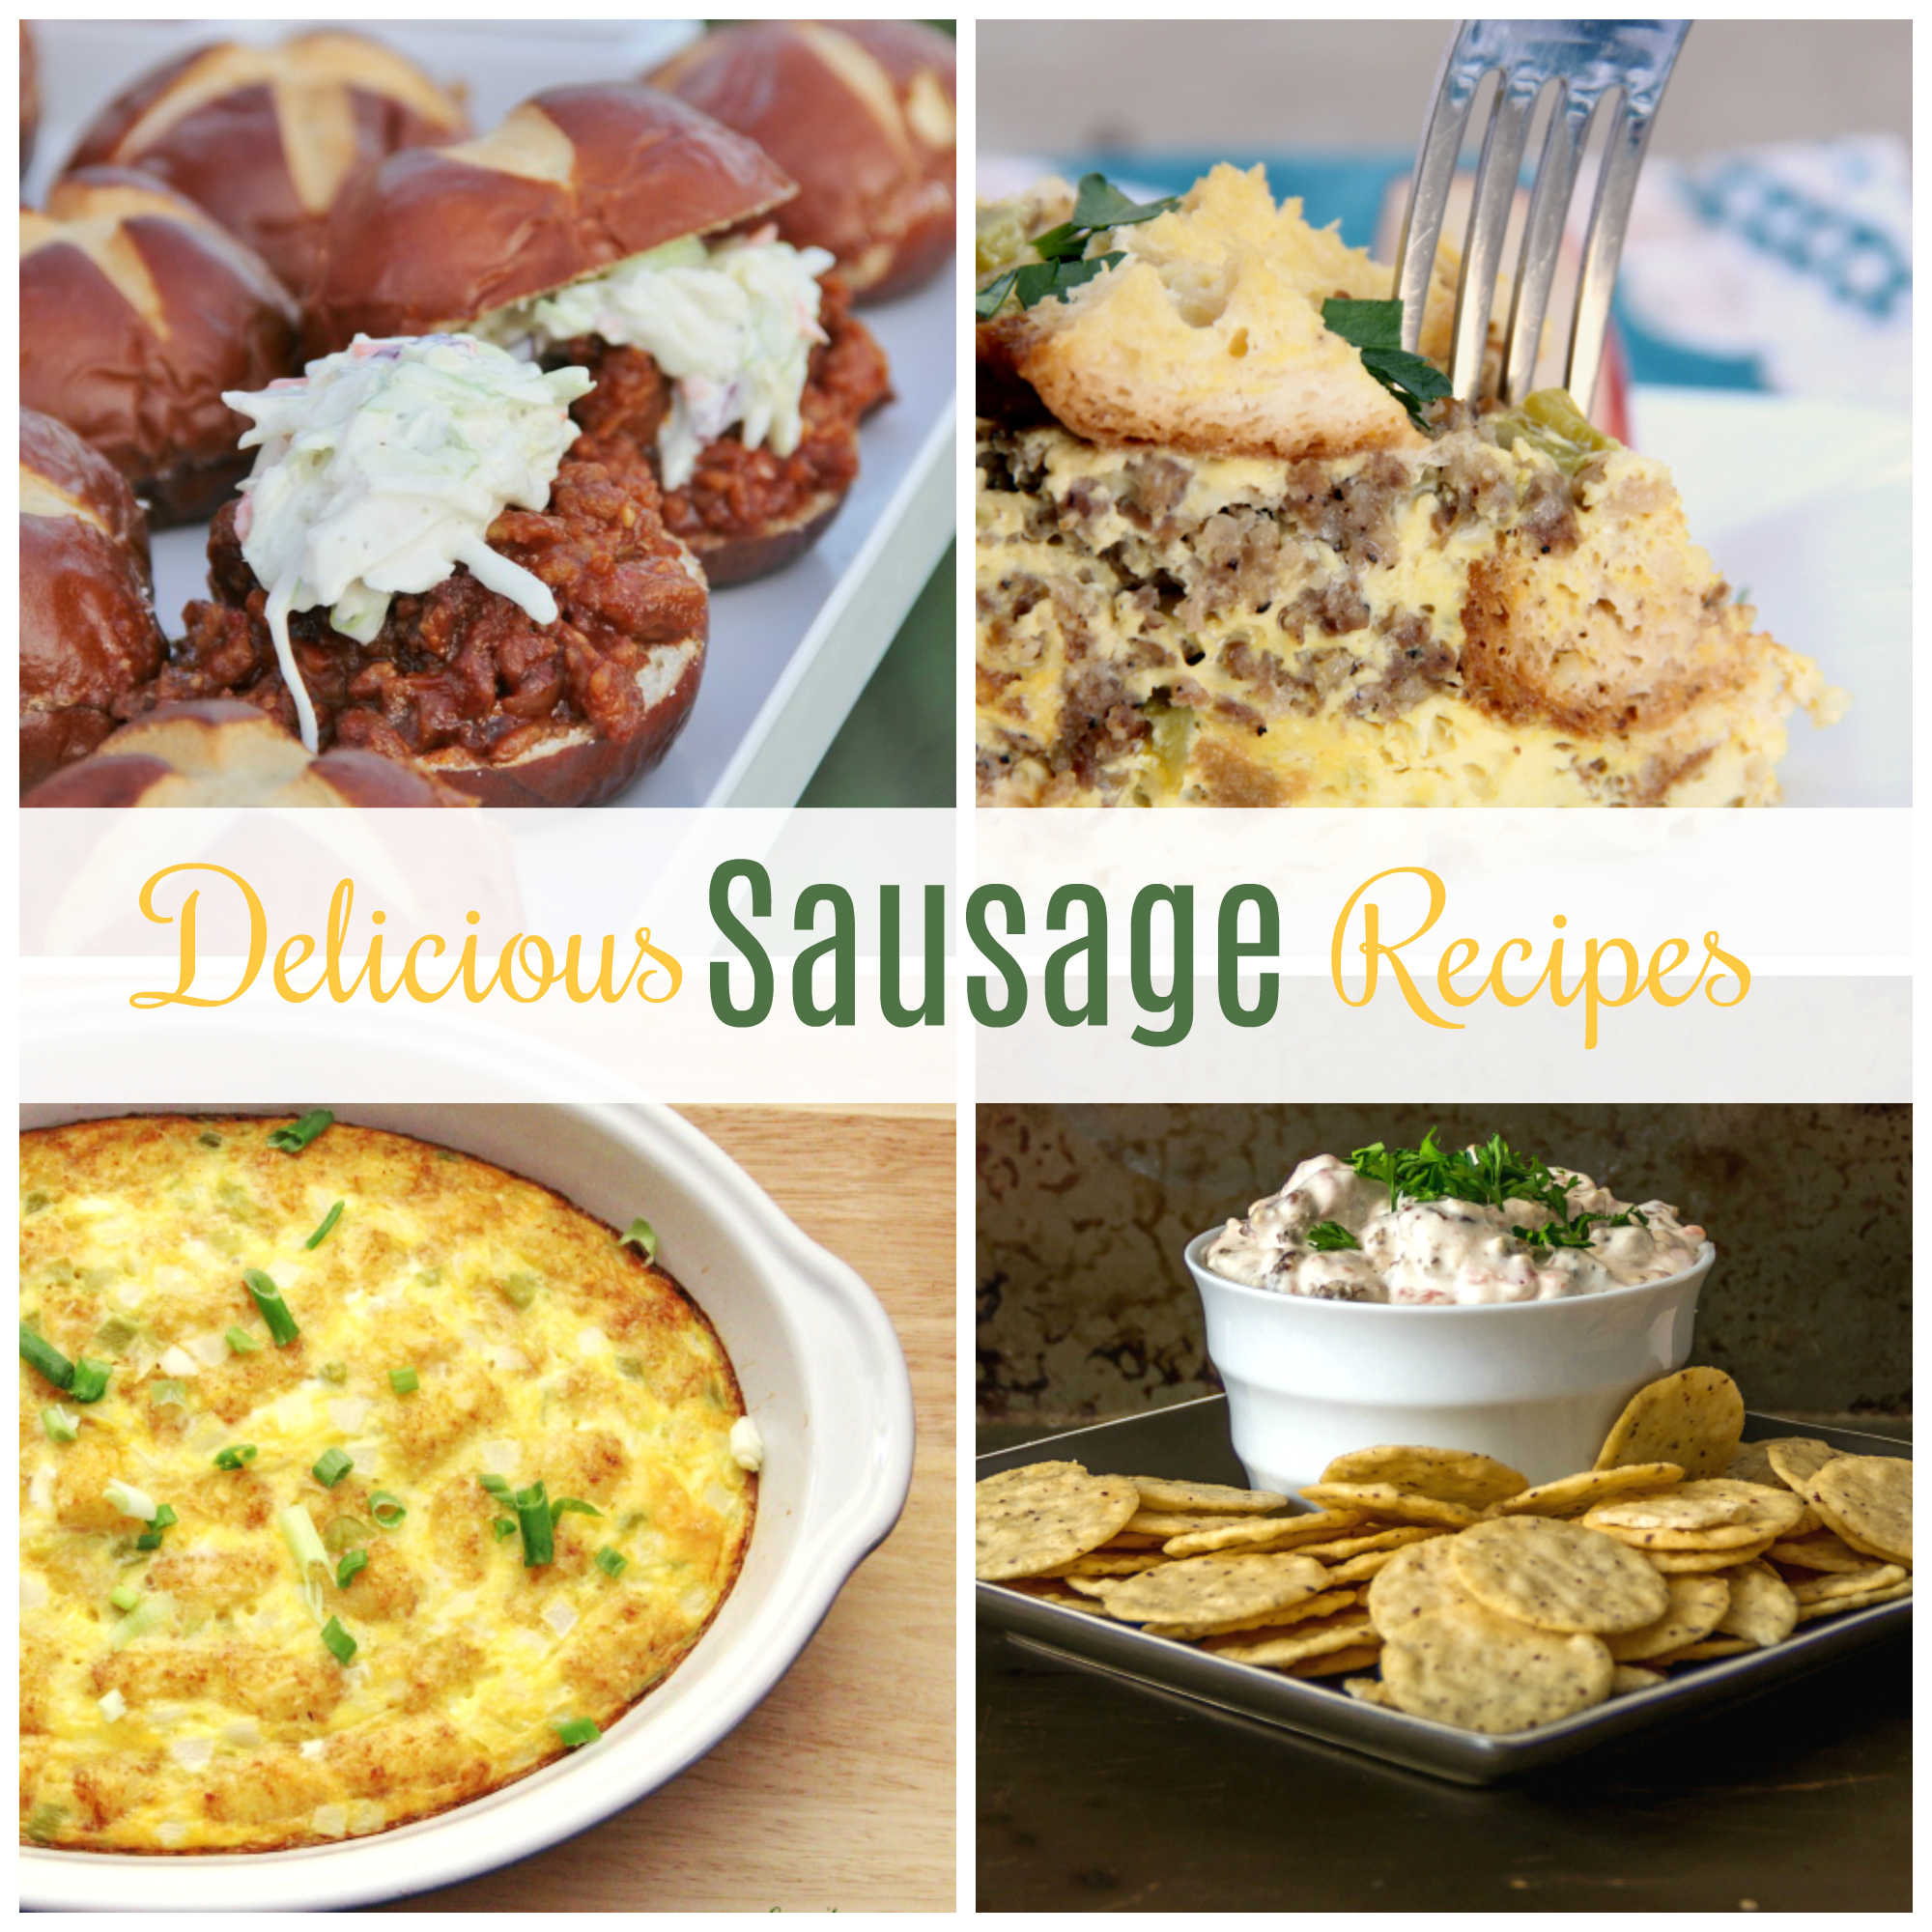 These are my favorite sausage recipes for breakfast, lunch, and dinner.  Love this collection of Delicious Sausage Recipes.